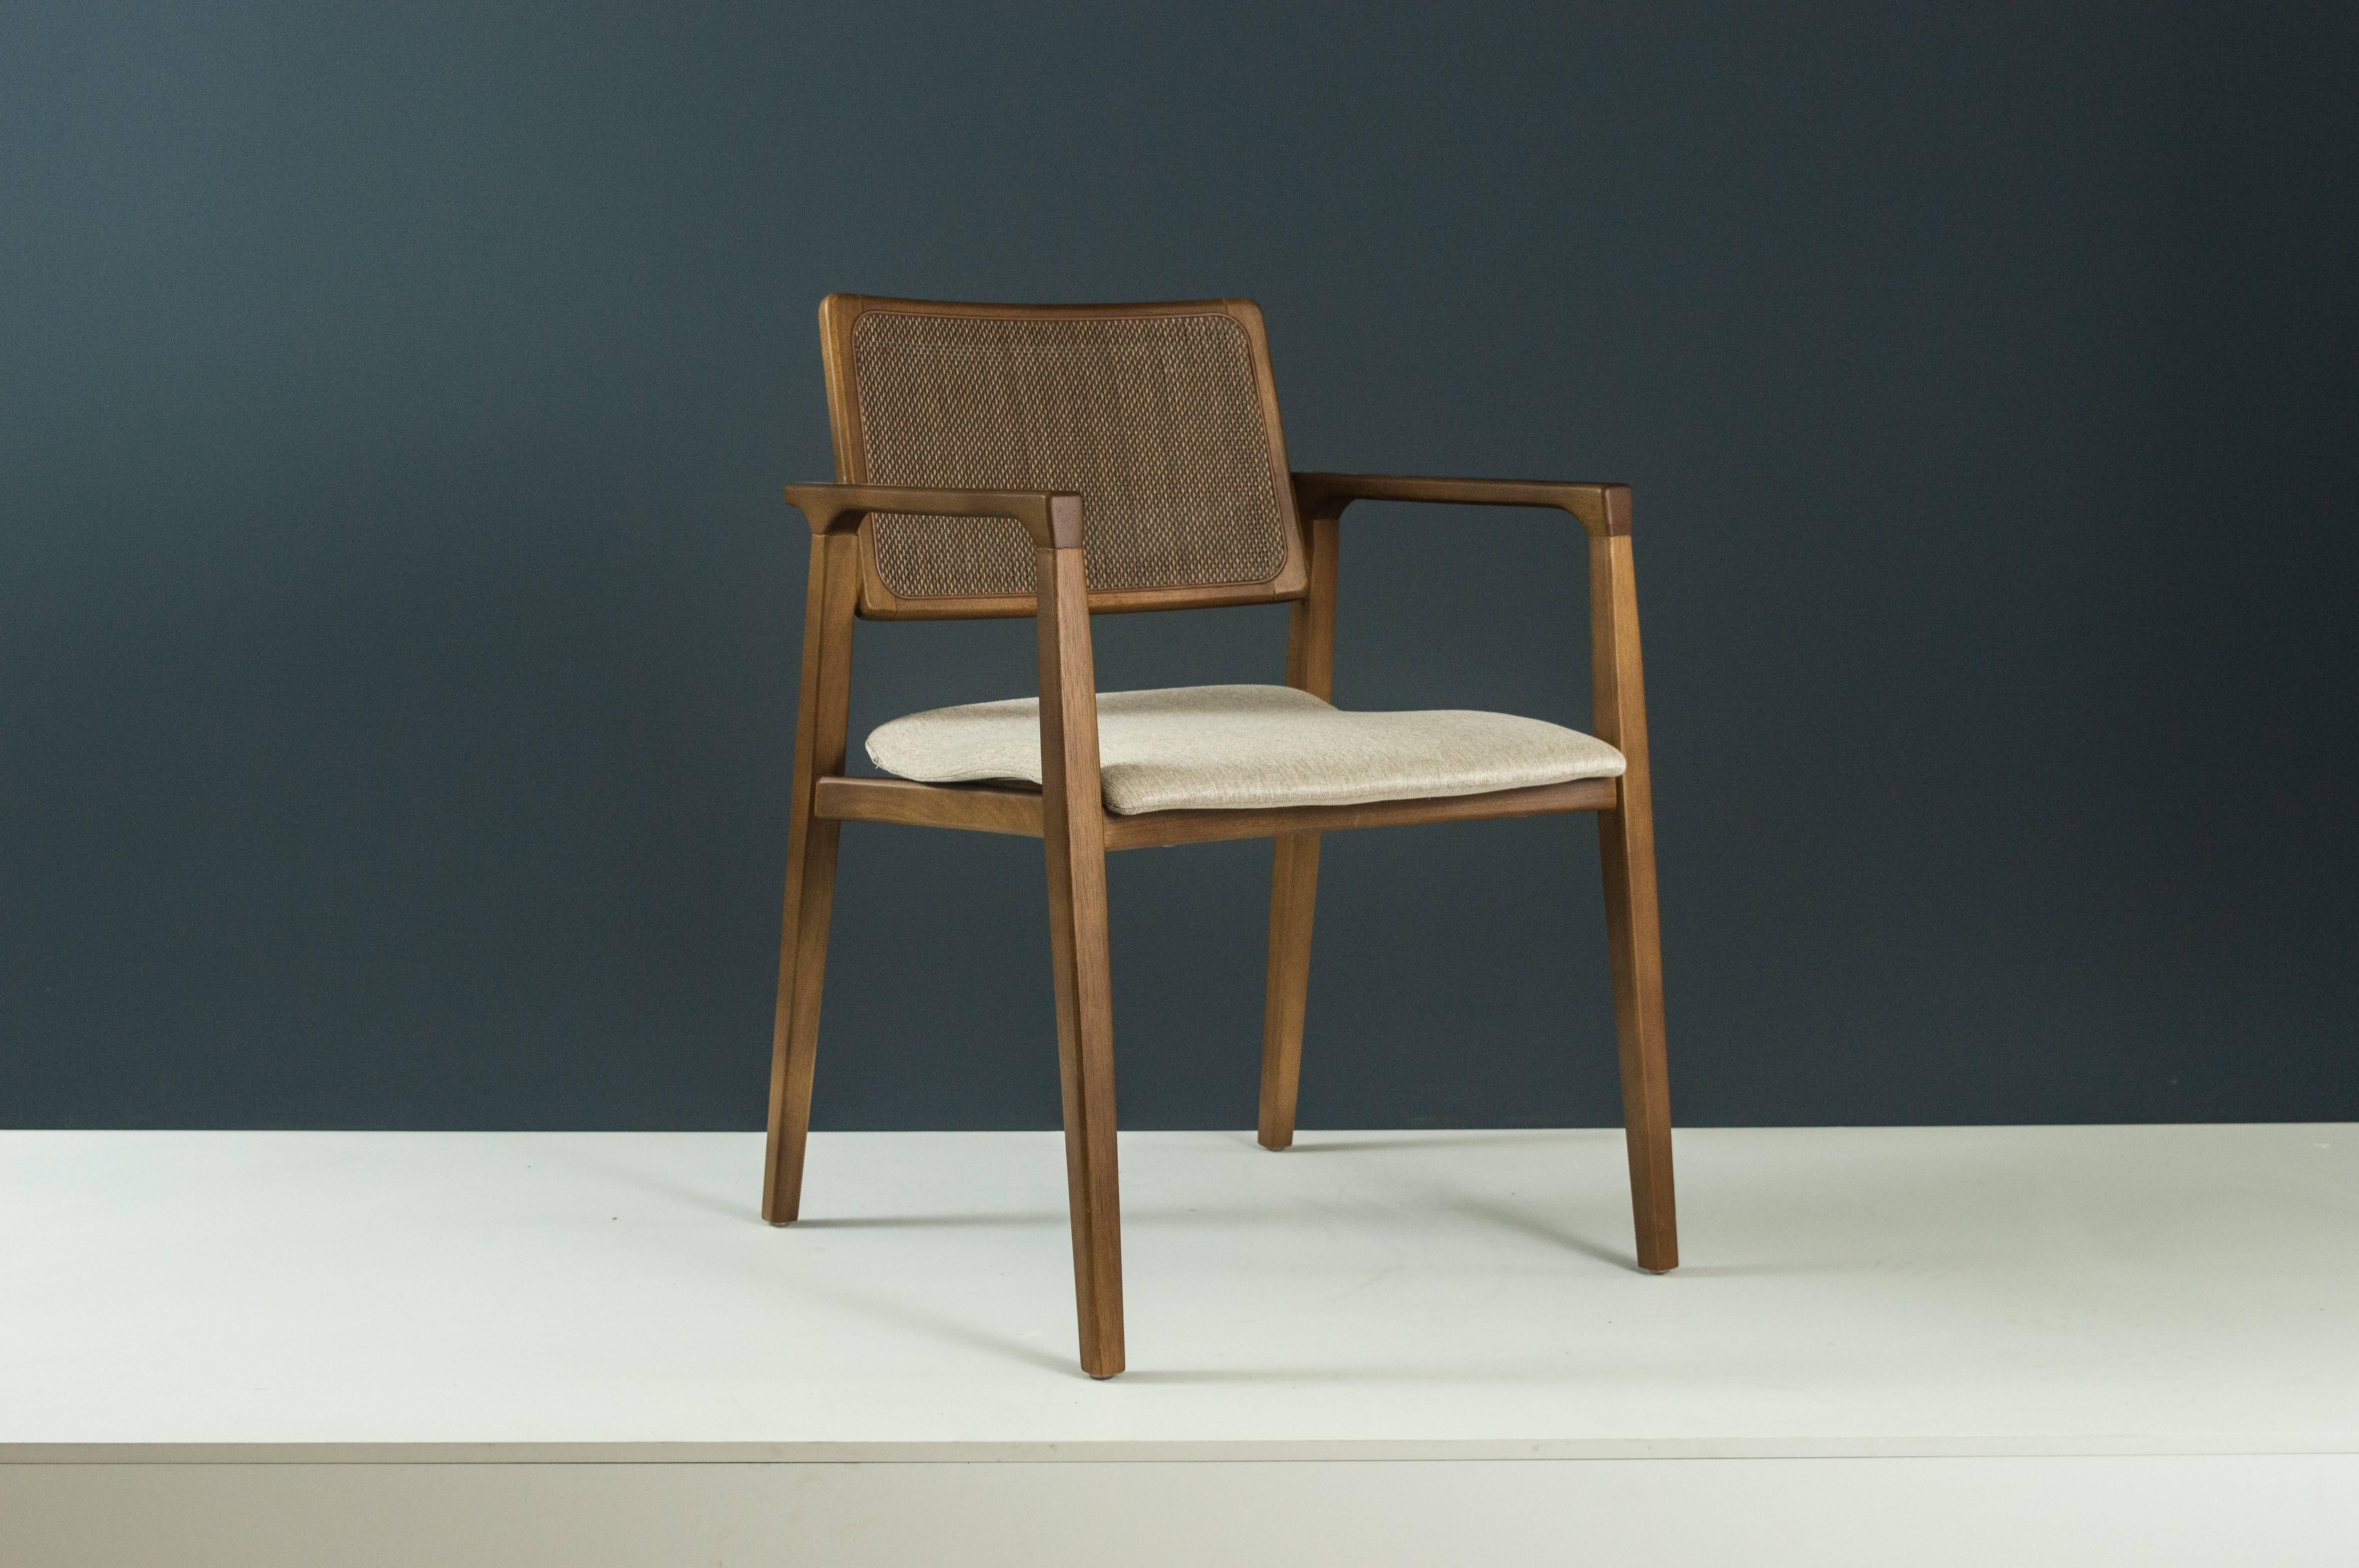 The Iracema chair has a Portuguese straw on the back, and a curved plywood seat, in a shape that resembles a gentle wave. The wooden structure has a light and elegant appearance with a connecting element behind the backrest.

Studiokaza products are